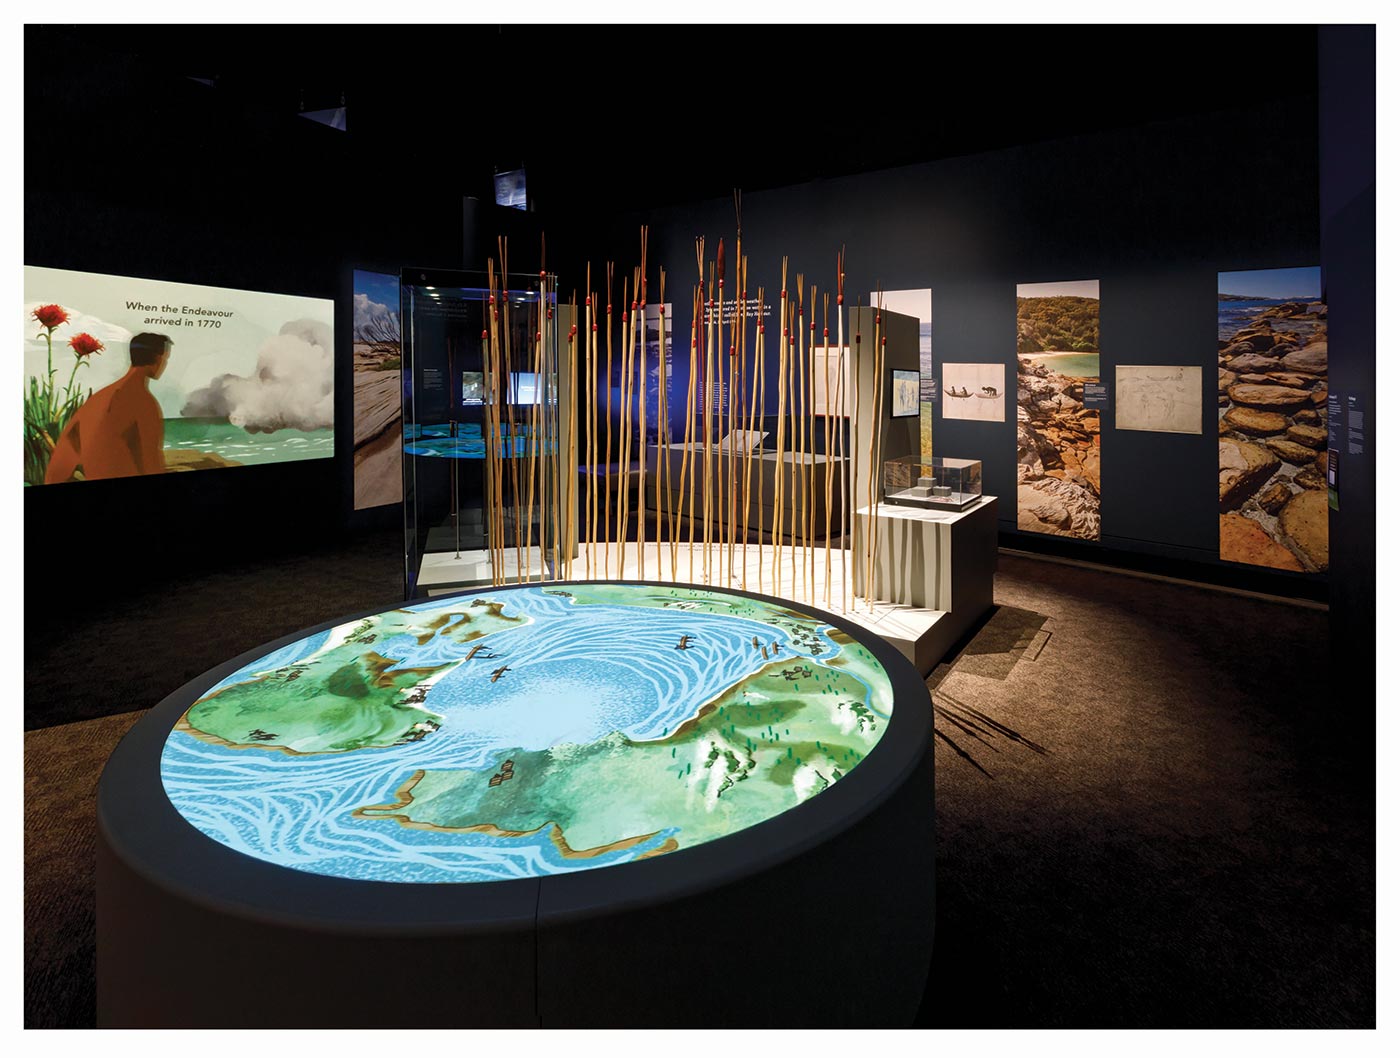 Exhibition display featuring various objects and interactives. - click to view larger image